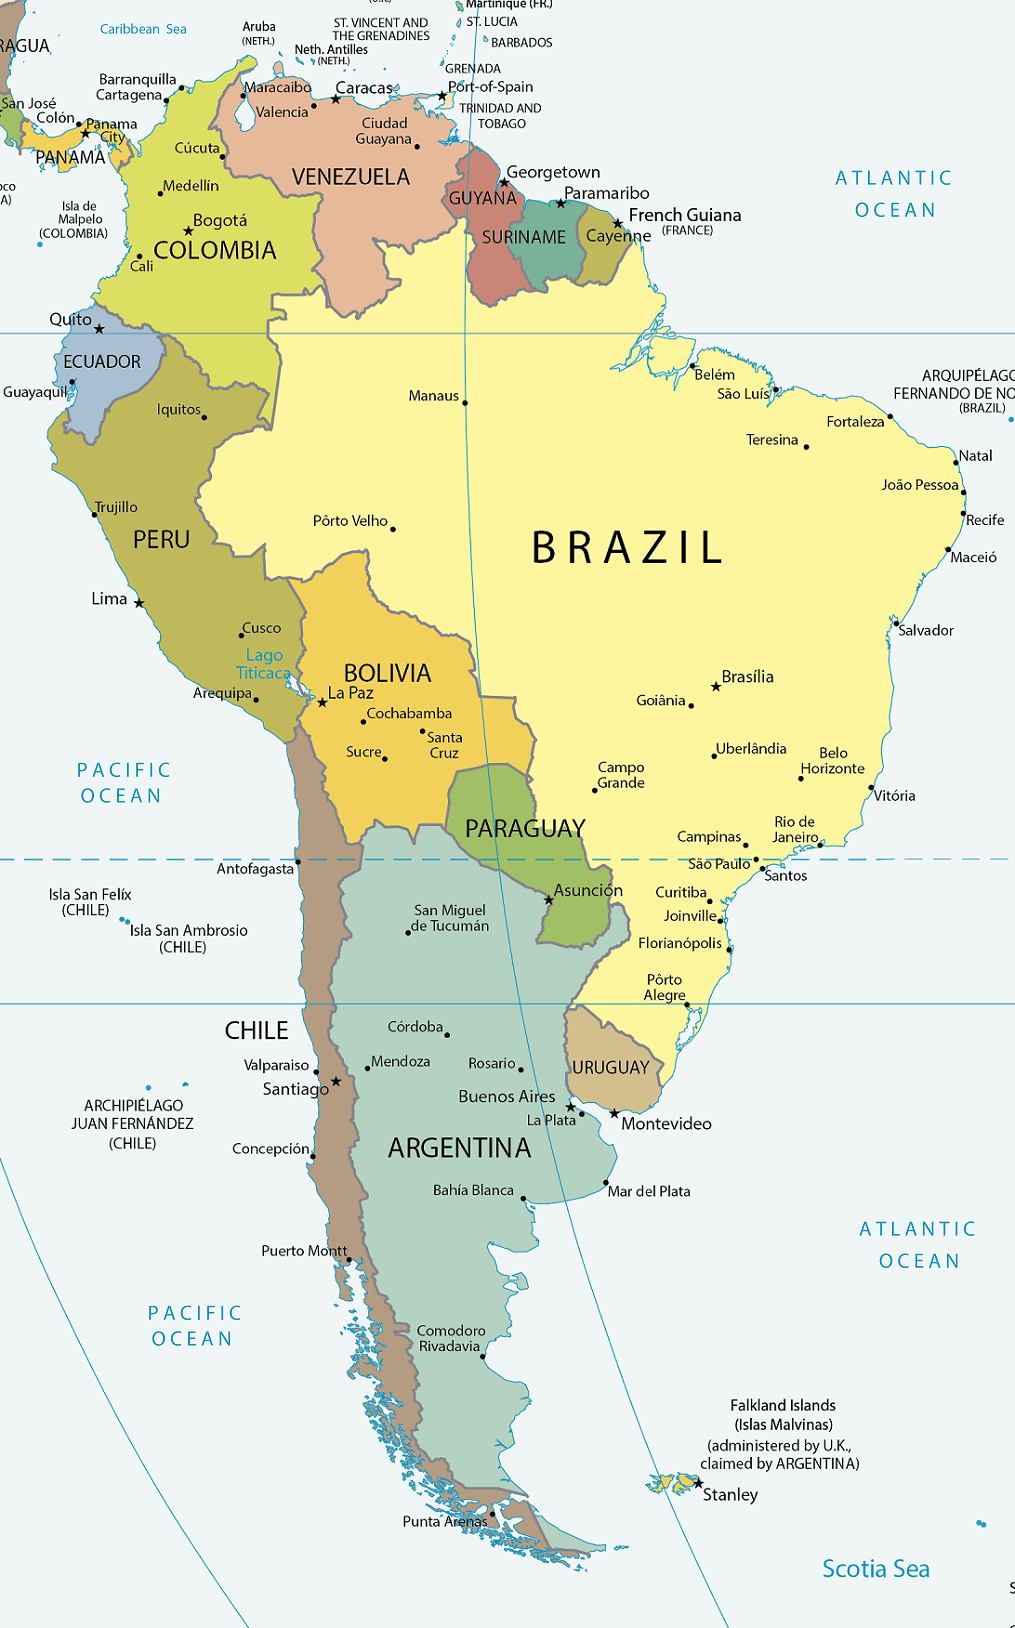 in the 19th century, south american cities became more integrated into the global economy